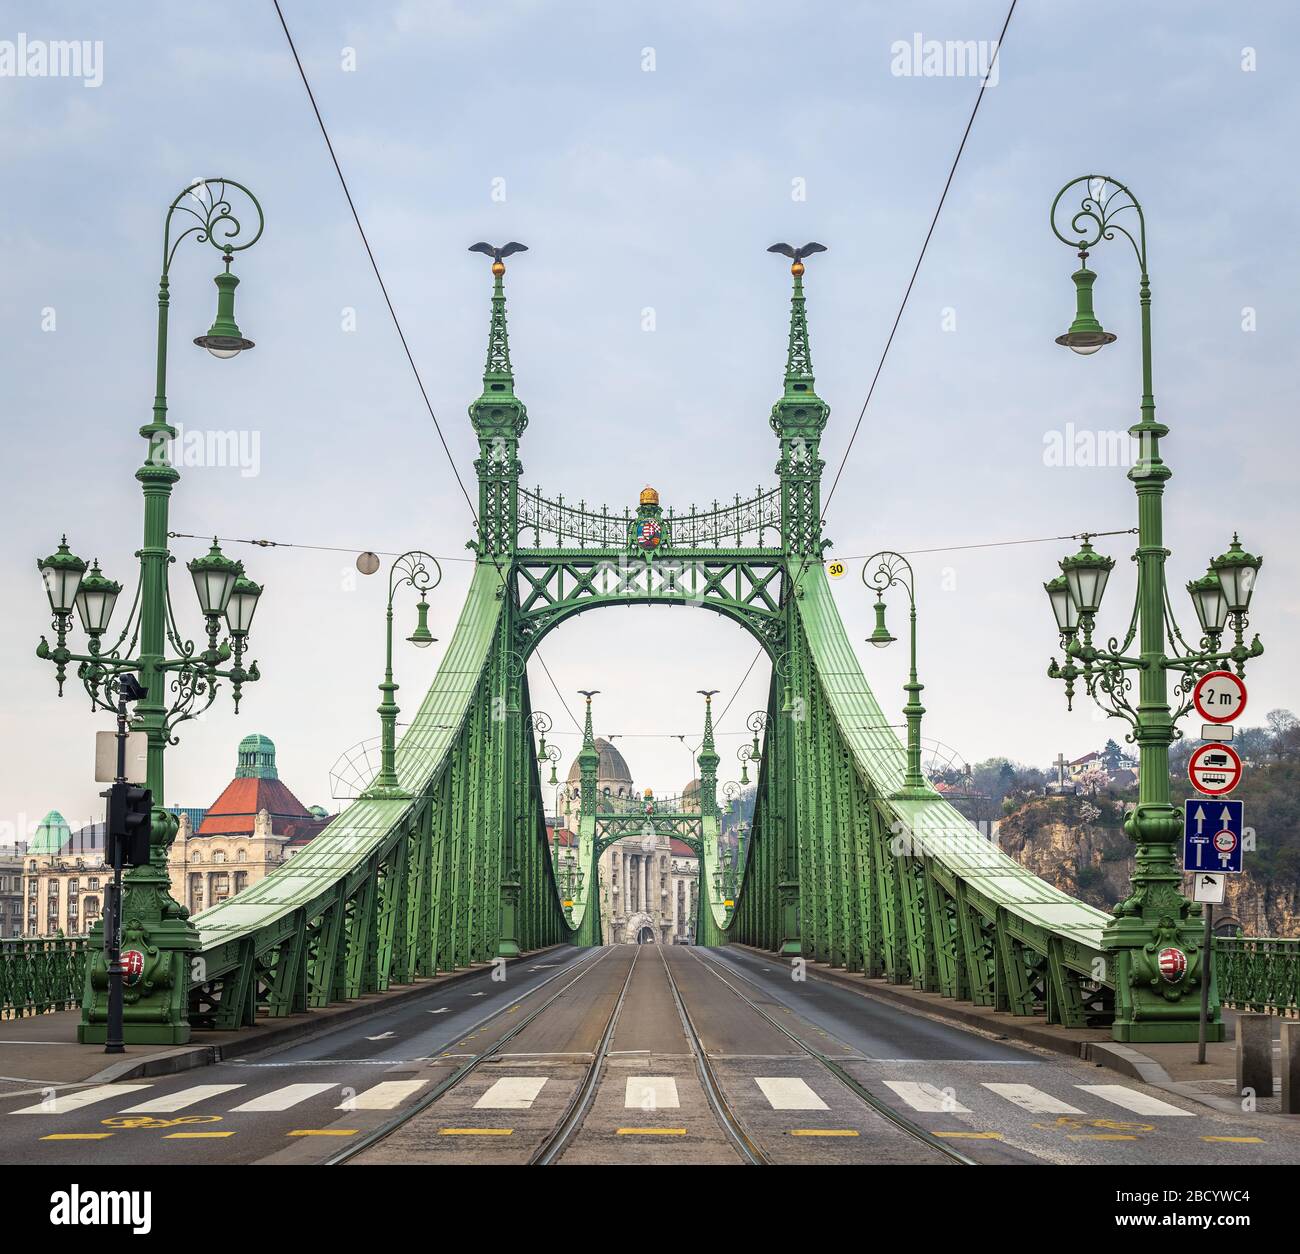 Budapest, Hungary - The totally empty Liberty Bridge (Szabadsag hid) on a quiet morning with no cars, trams and tourists on it due to the 2020 Coronav Stock Photo